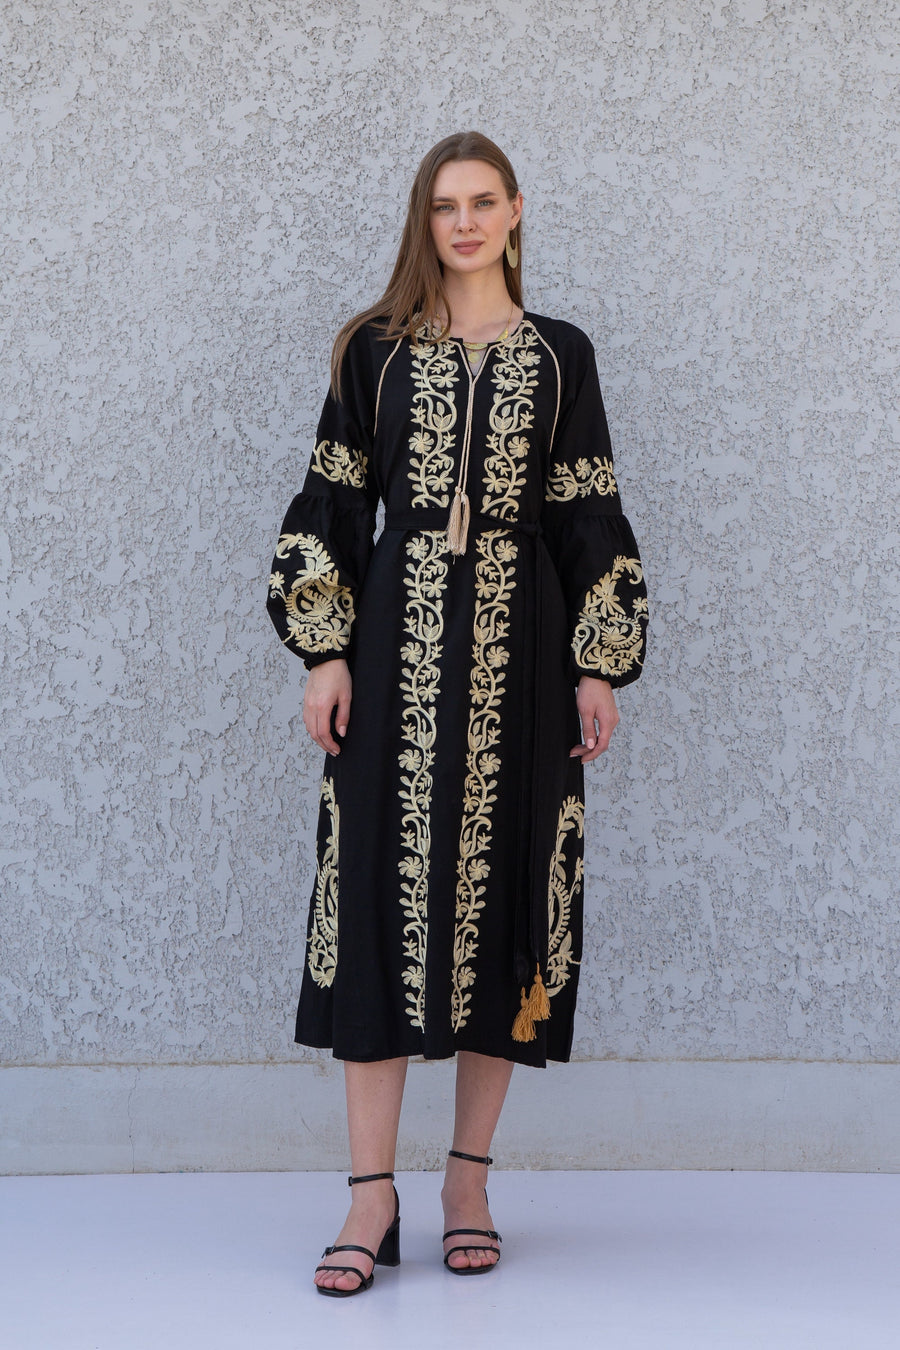 Midi Black cotton kaftan dress, embroidered tunic dress, caftans for women, Egyptian cotton. Summer caftan, party, casual, home dress